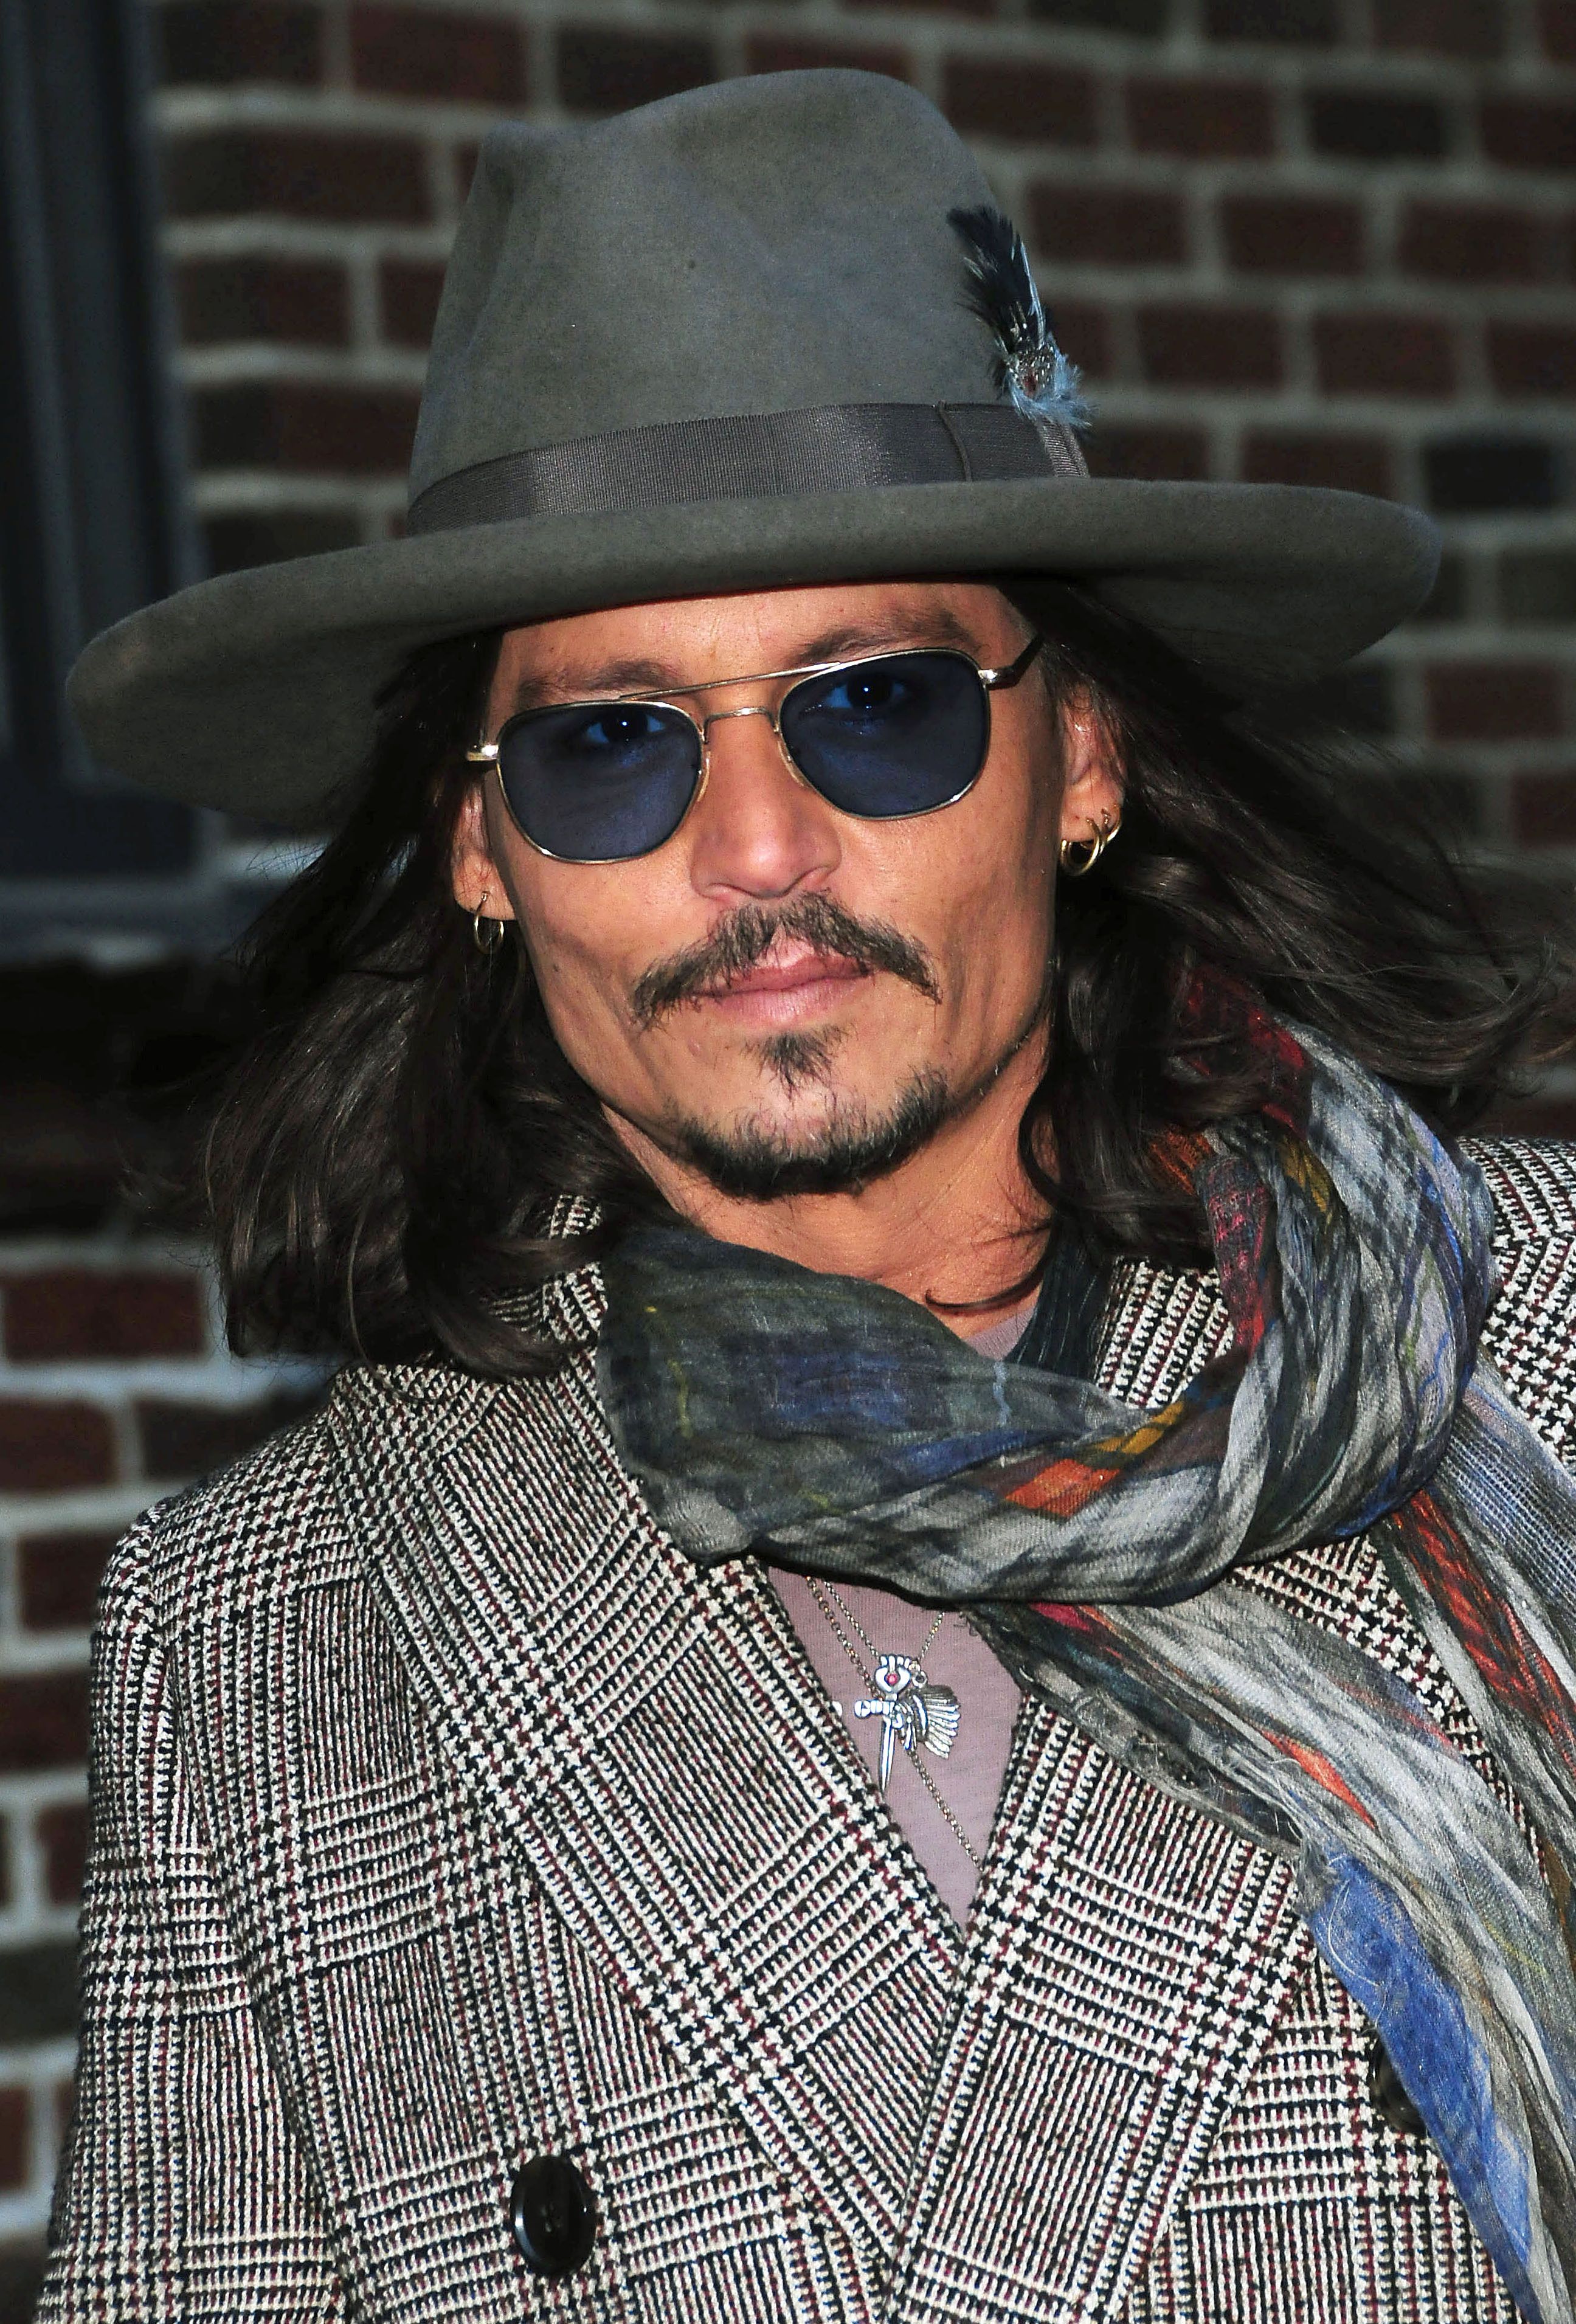 I was Johnny Depp's biggest fan as a teenager – but I'd never admit that  now | The Independent